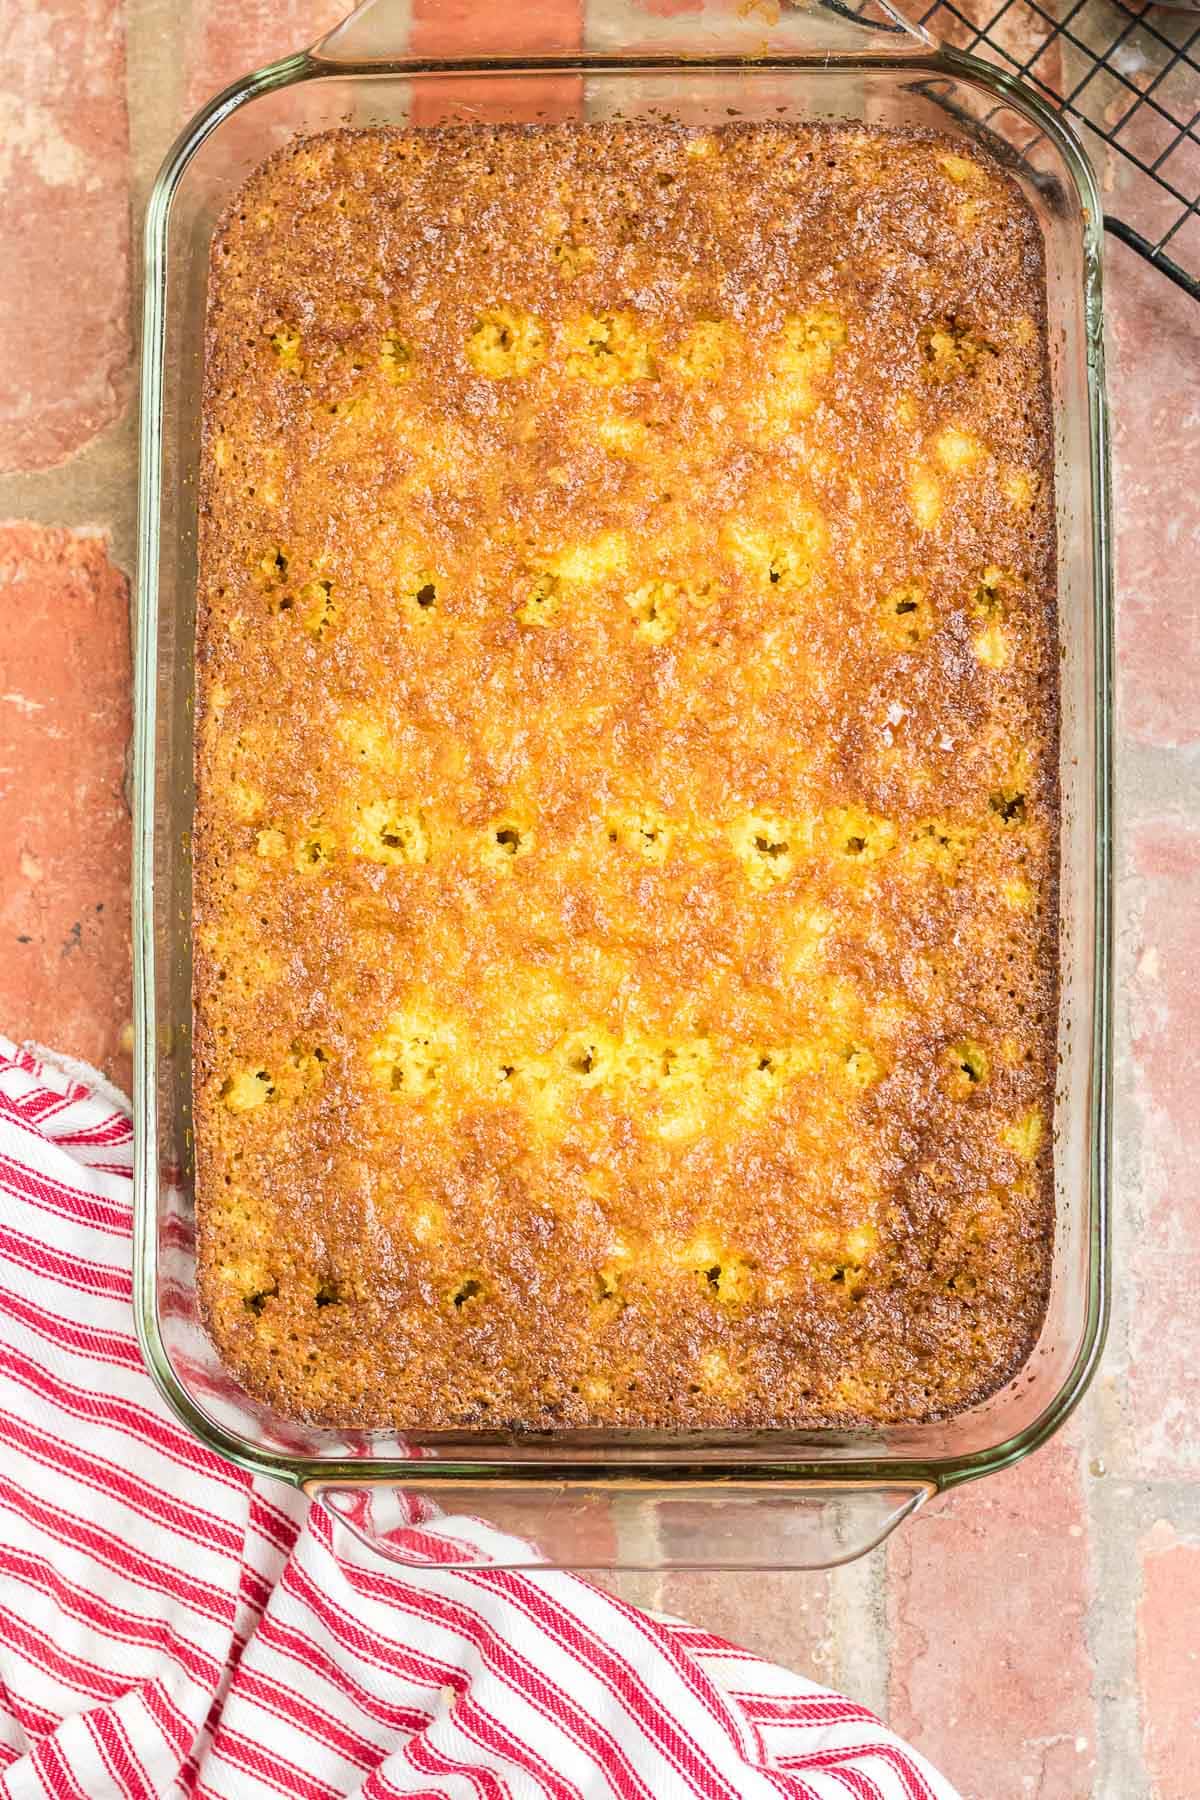 The baked cake with holes poked all over it.